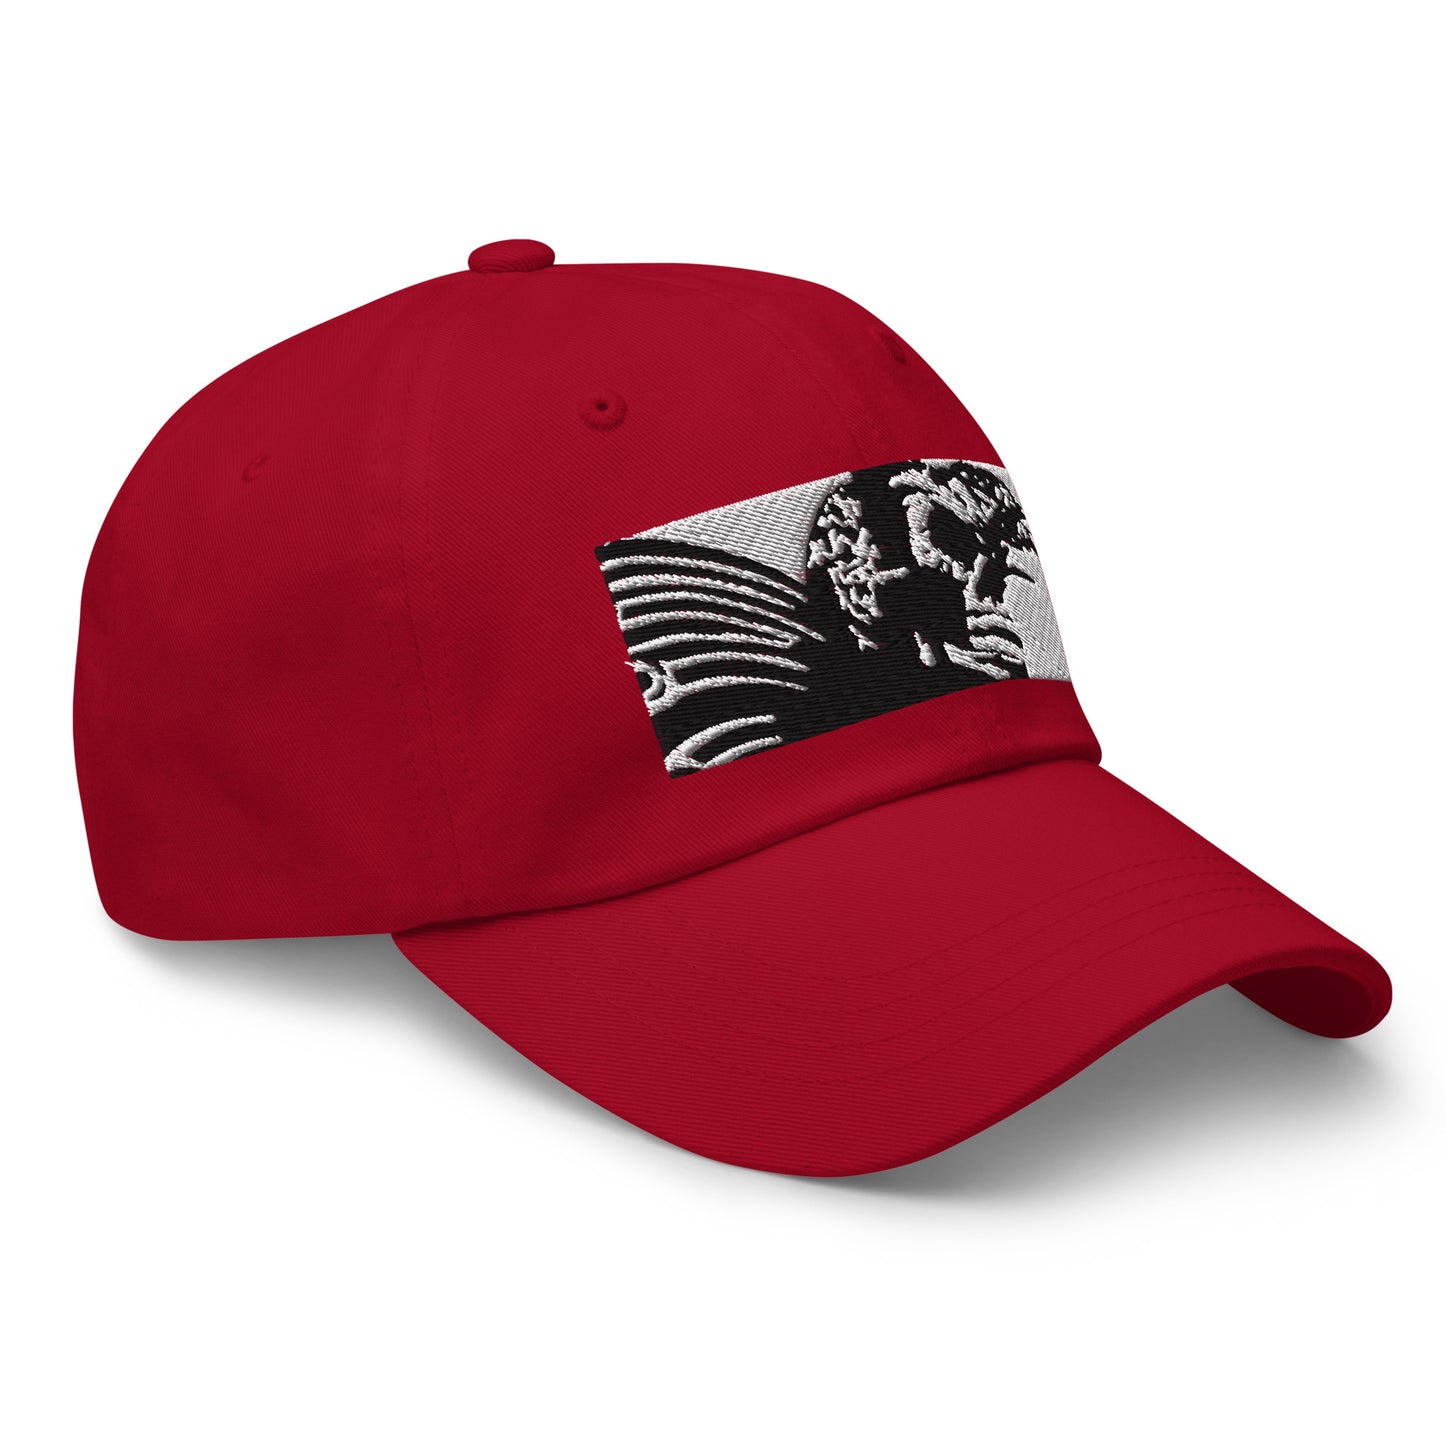 Skull Warrior (Black & White) - Classic Dad Hat - Fry1Productions